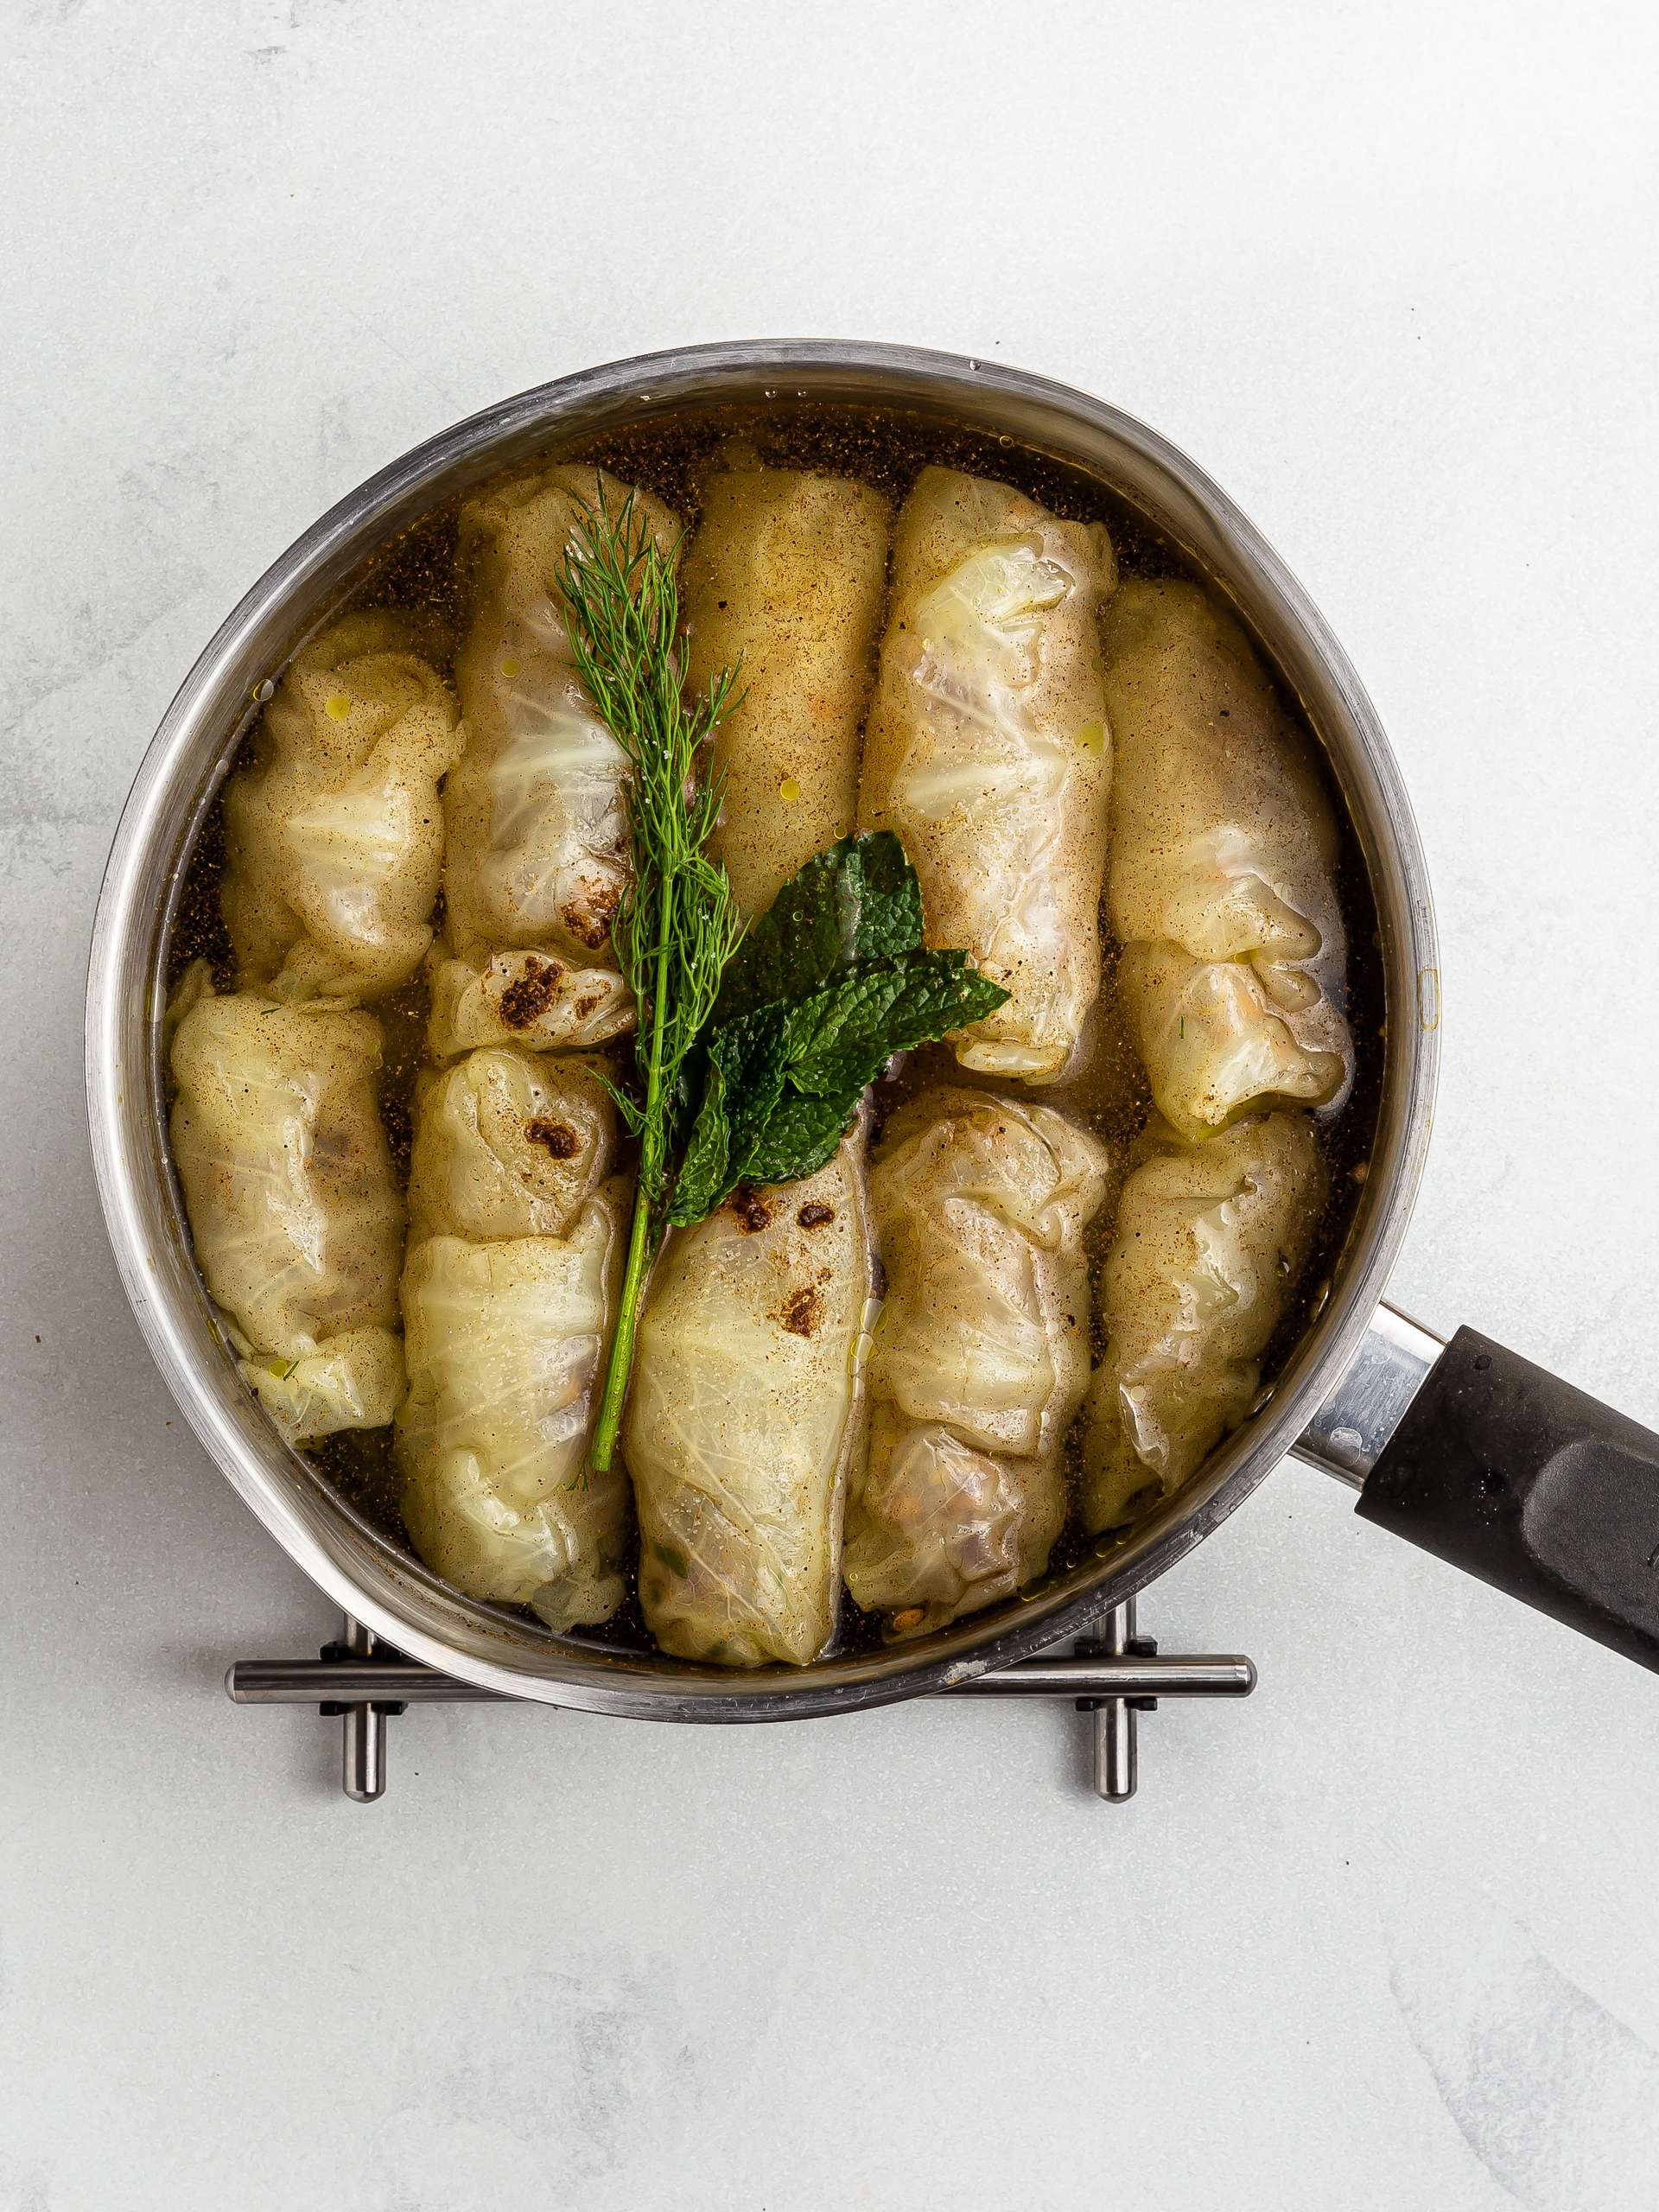 cabbage rolls cooking in a pot